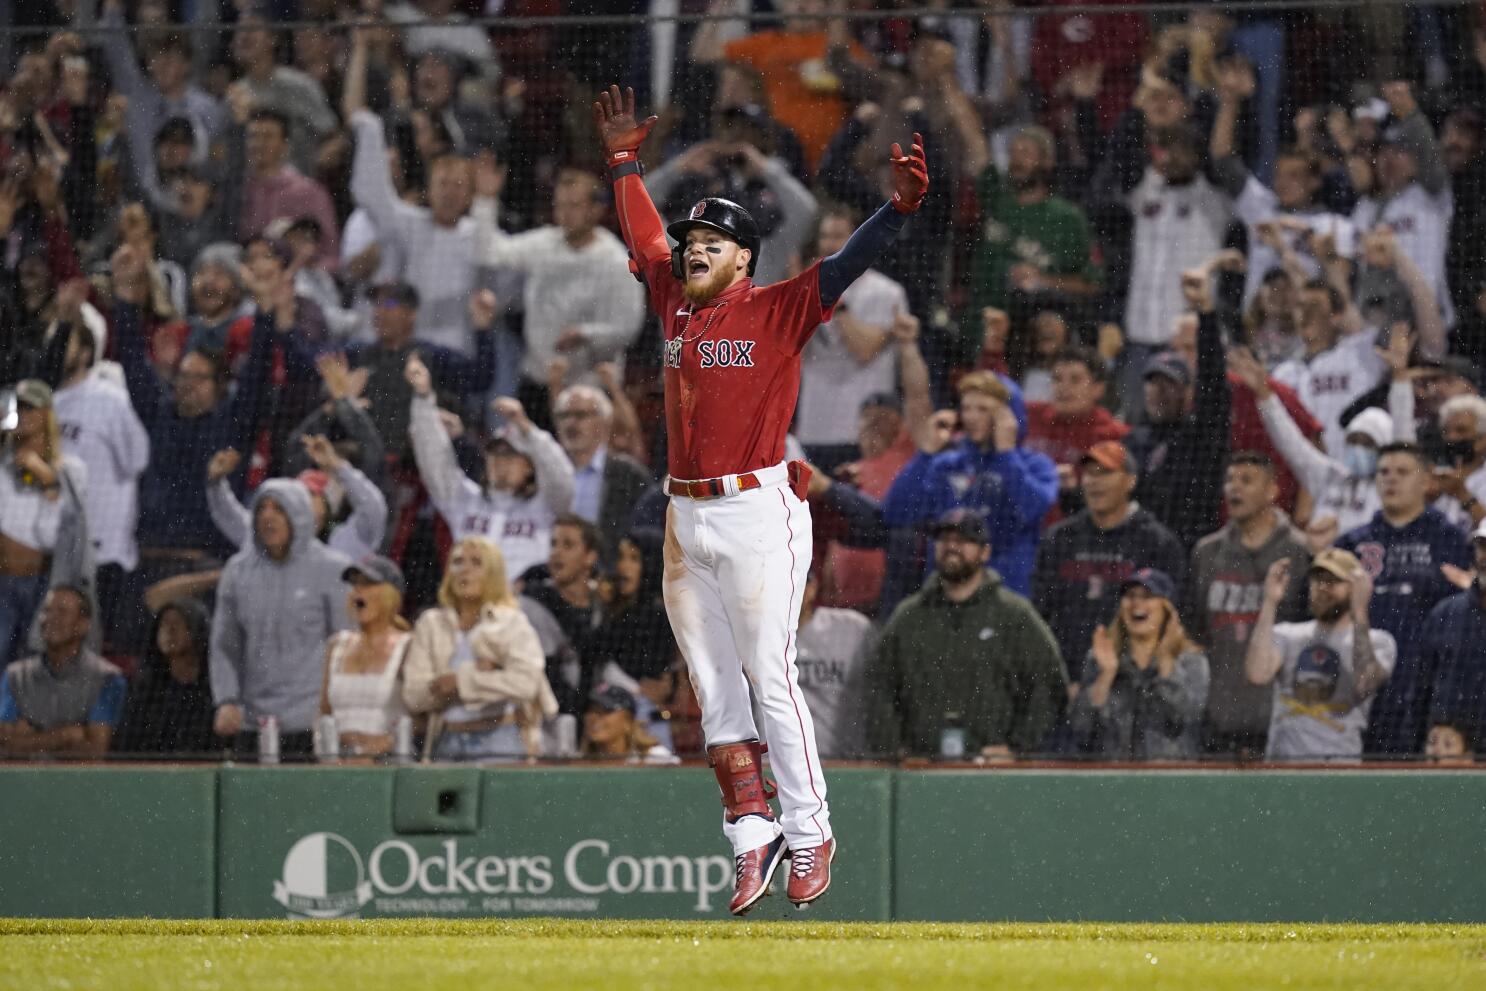 Verdugo, Red Sox rally from 4 down, top Blue Jays 6-5 in 9th - The